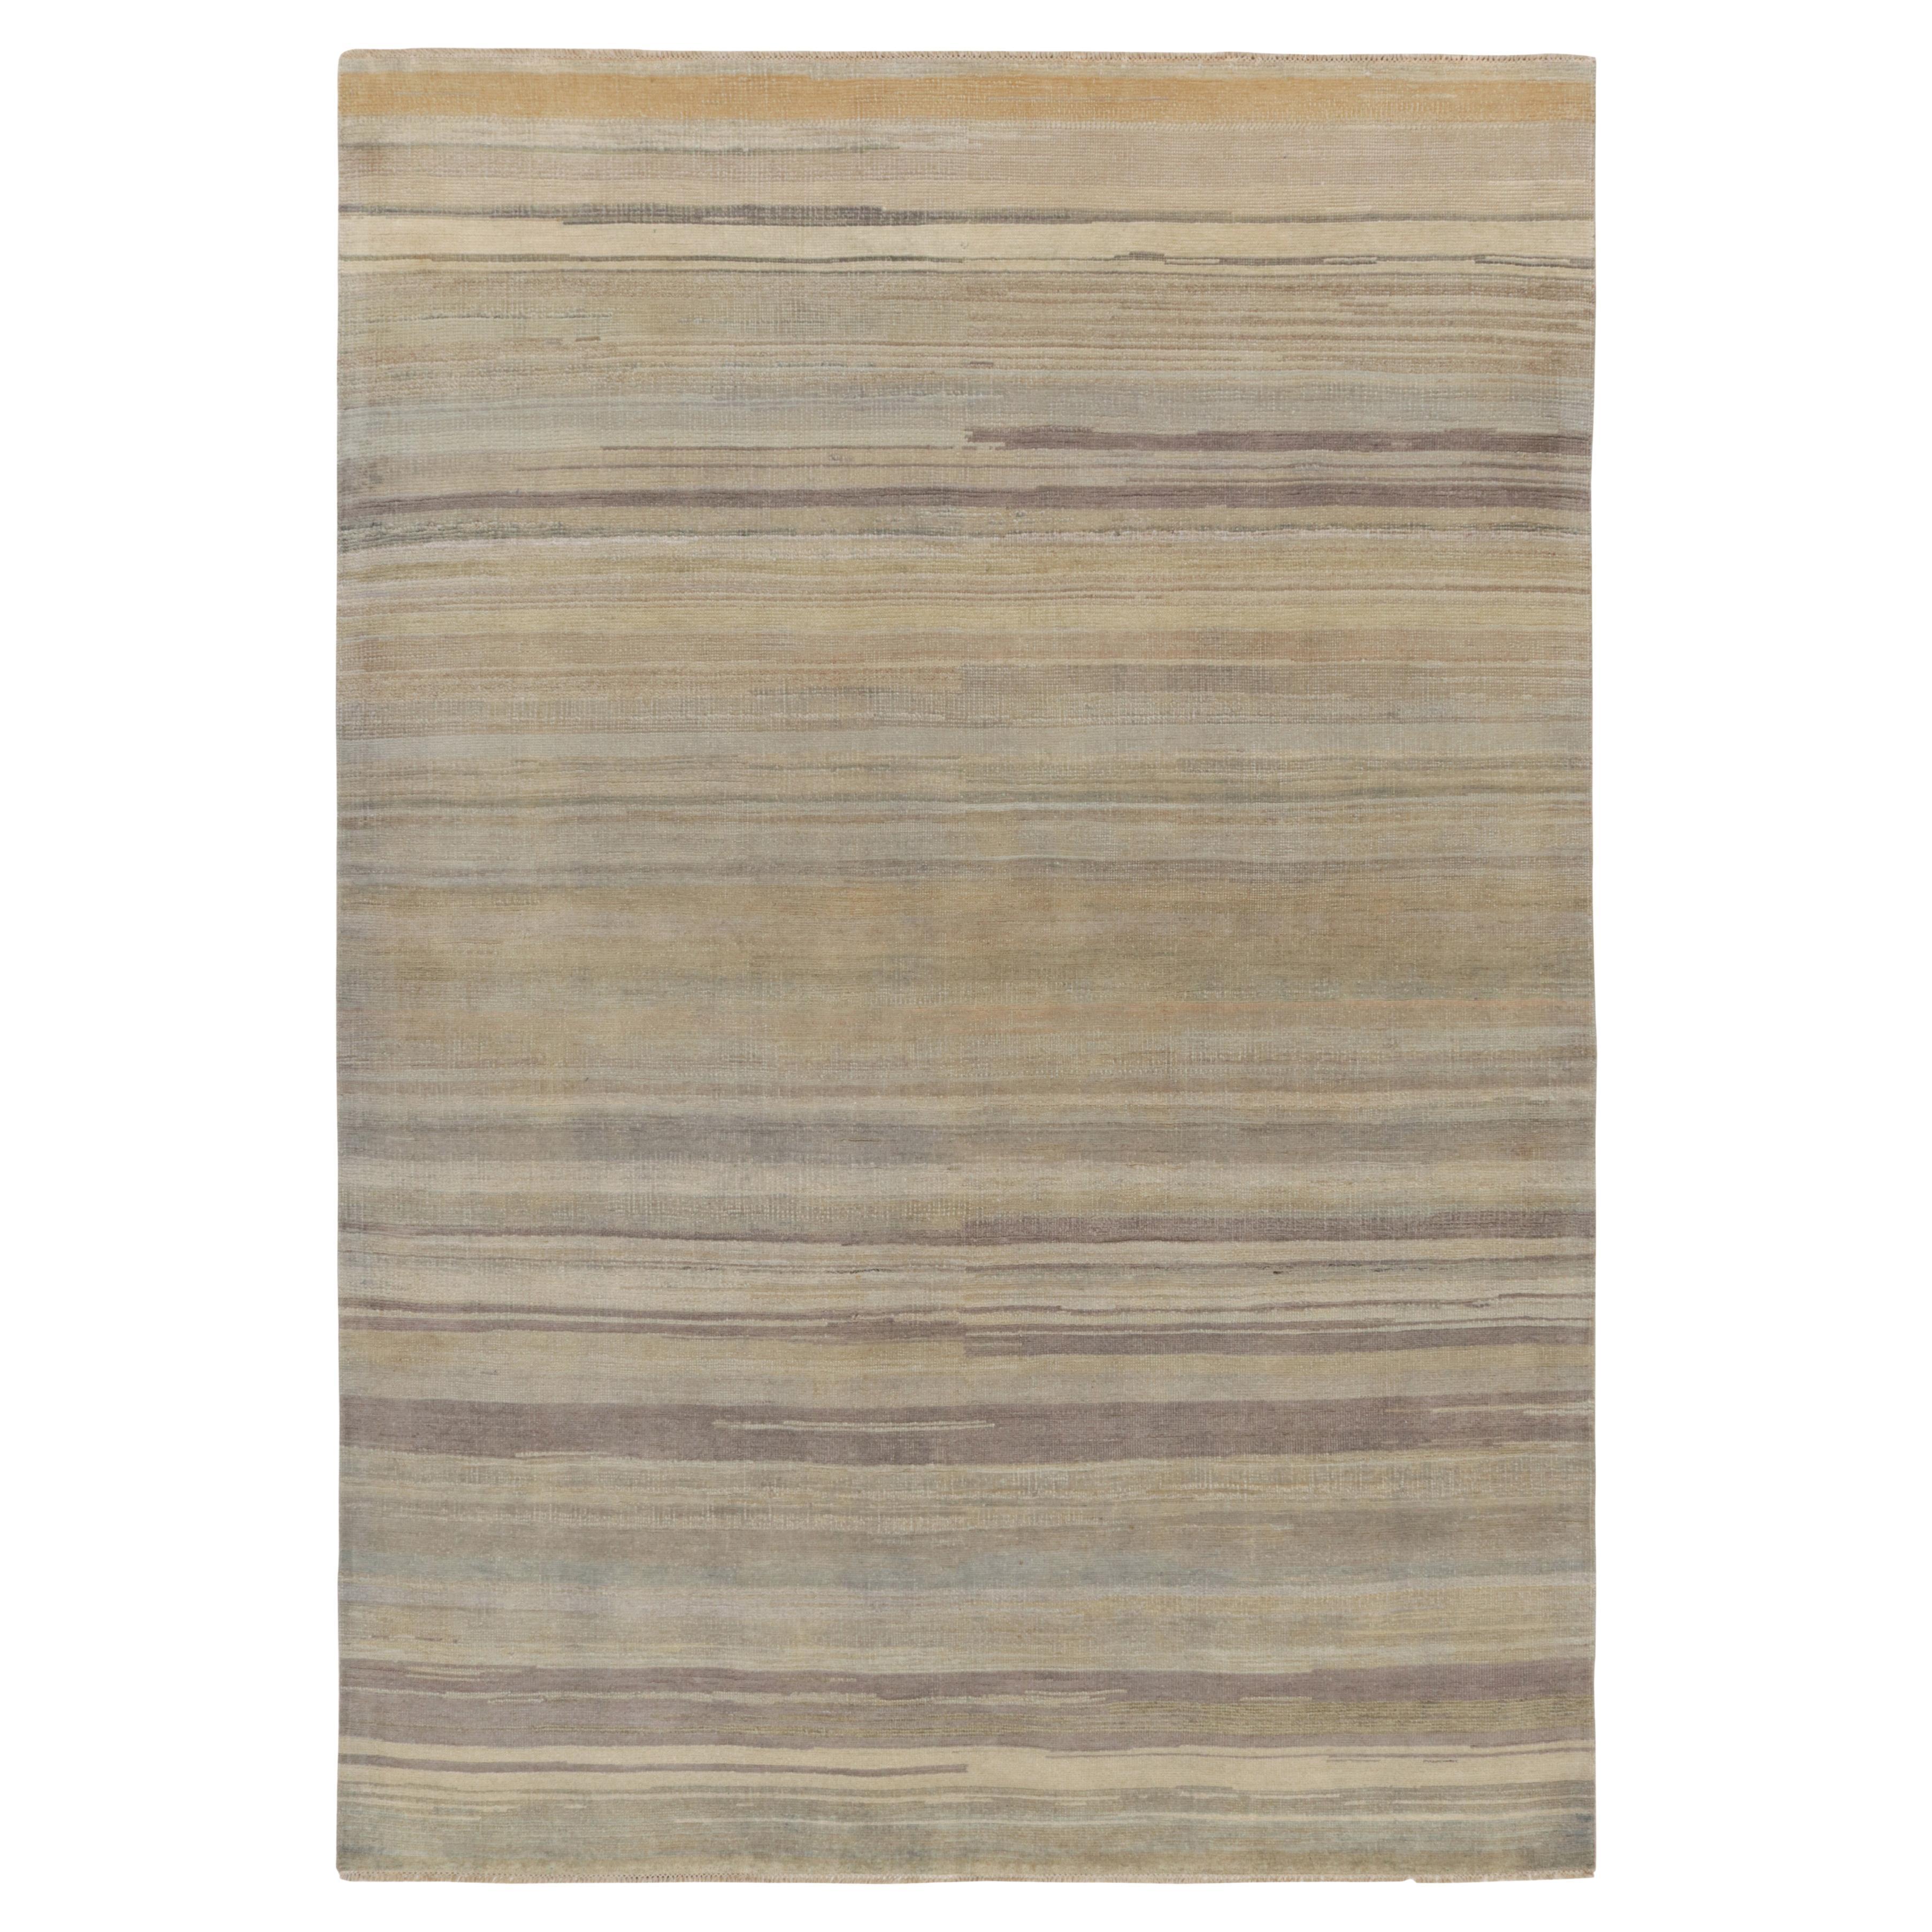 Rug & Kilim's Modern Textural Rug in Beige, Gray and Blue Stripes and Striae (Tapis à rayures beige, gris et bleu)